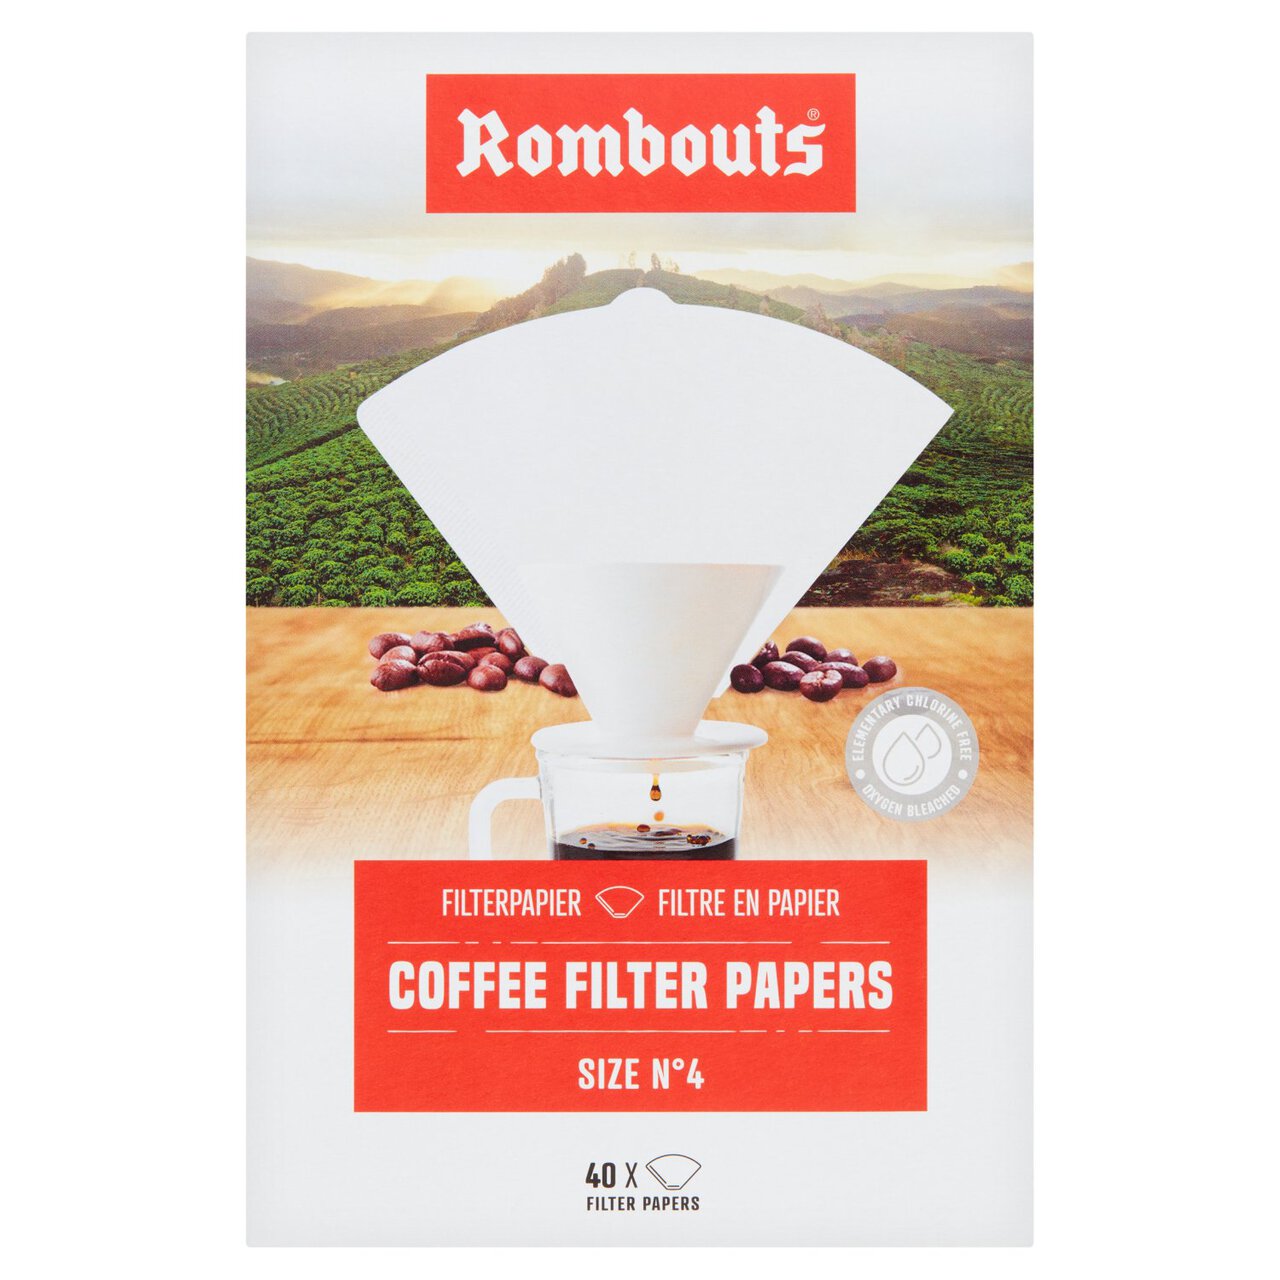 Rombouts Coffee Filter Papers N4 40 per pack